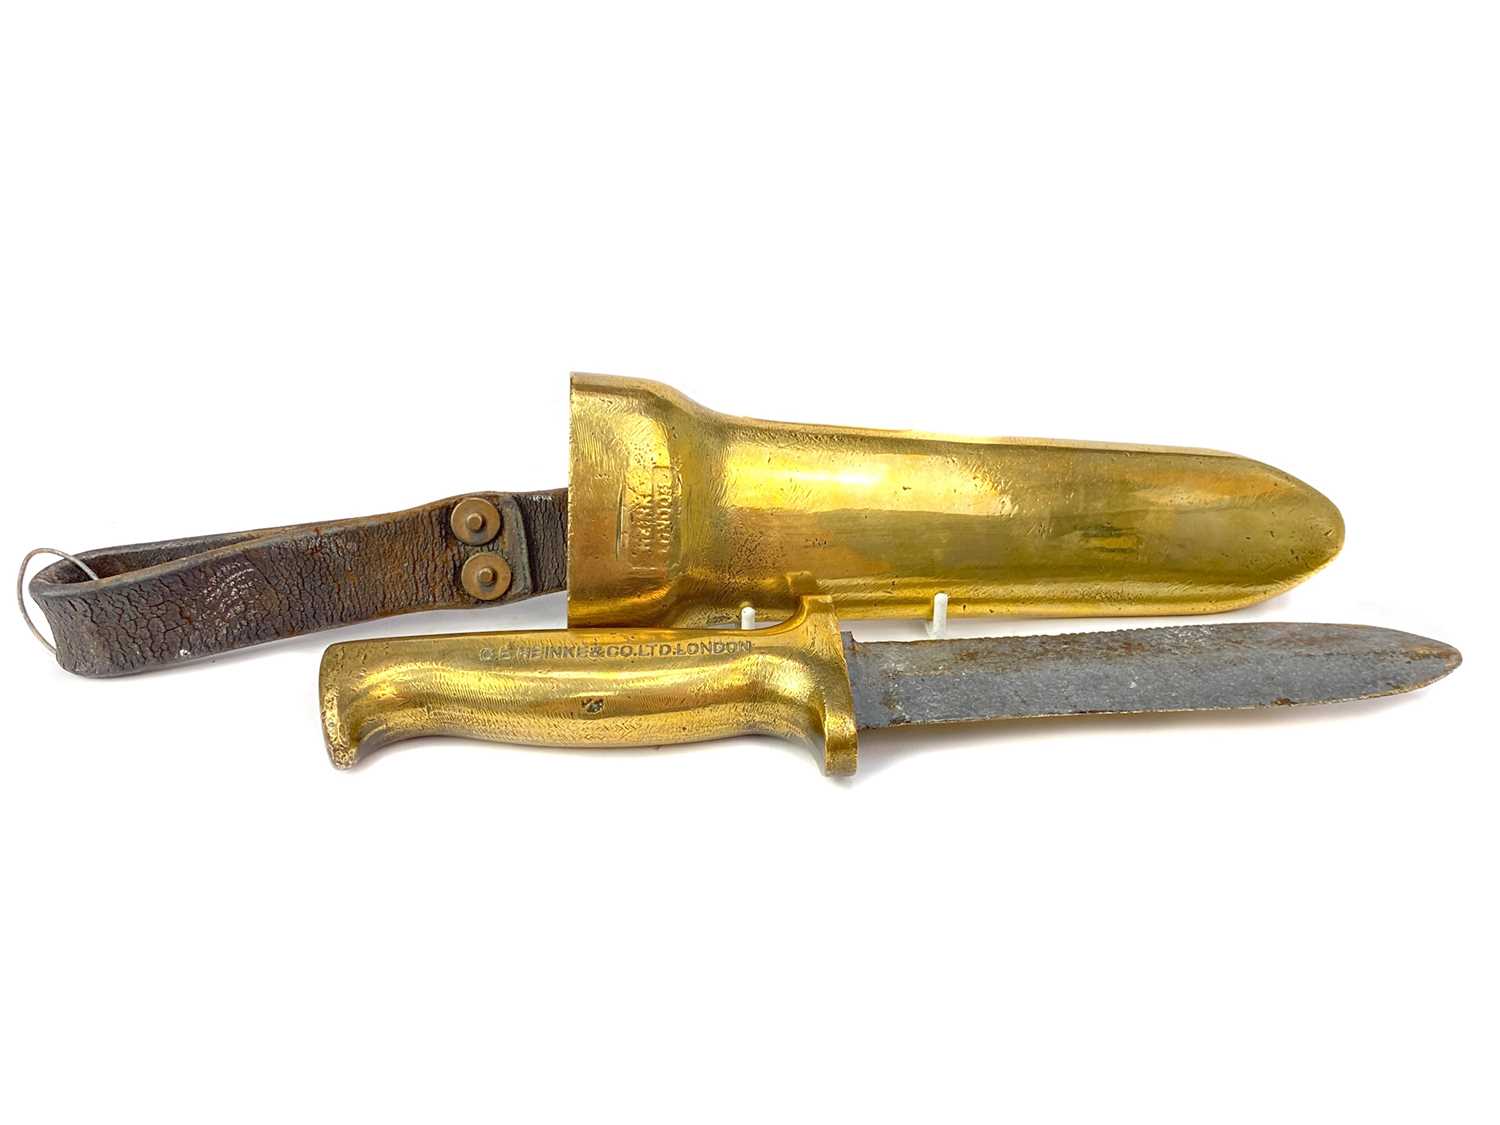 Lot 1609 - A LATE 19TH/EARLY 20TH CENTURY C E HEINKE & CO LTD LONDON BRASS AND STEEL DIVER'S KNIFE